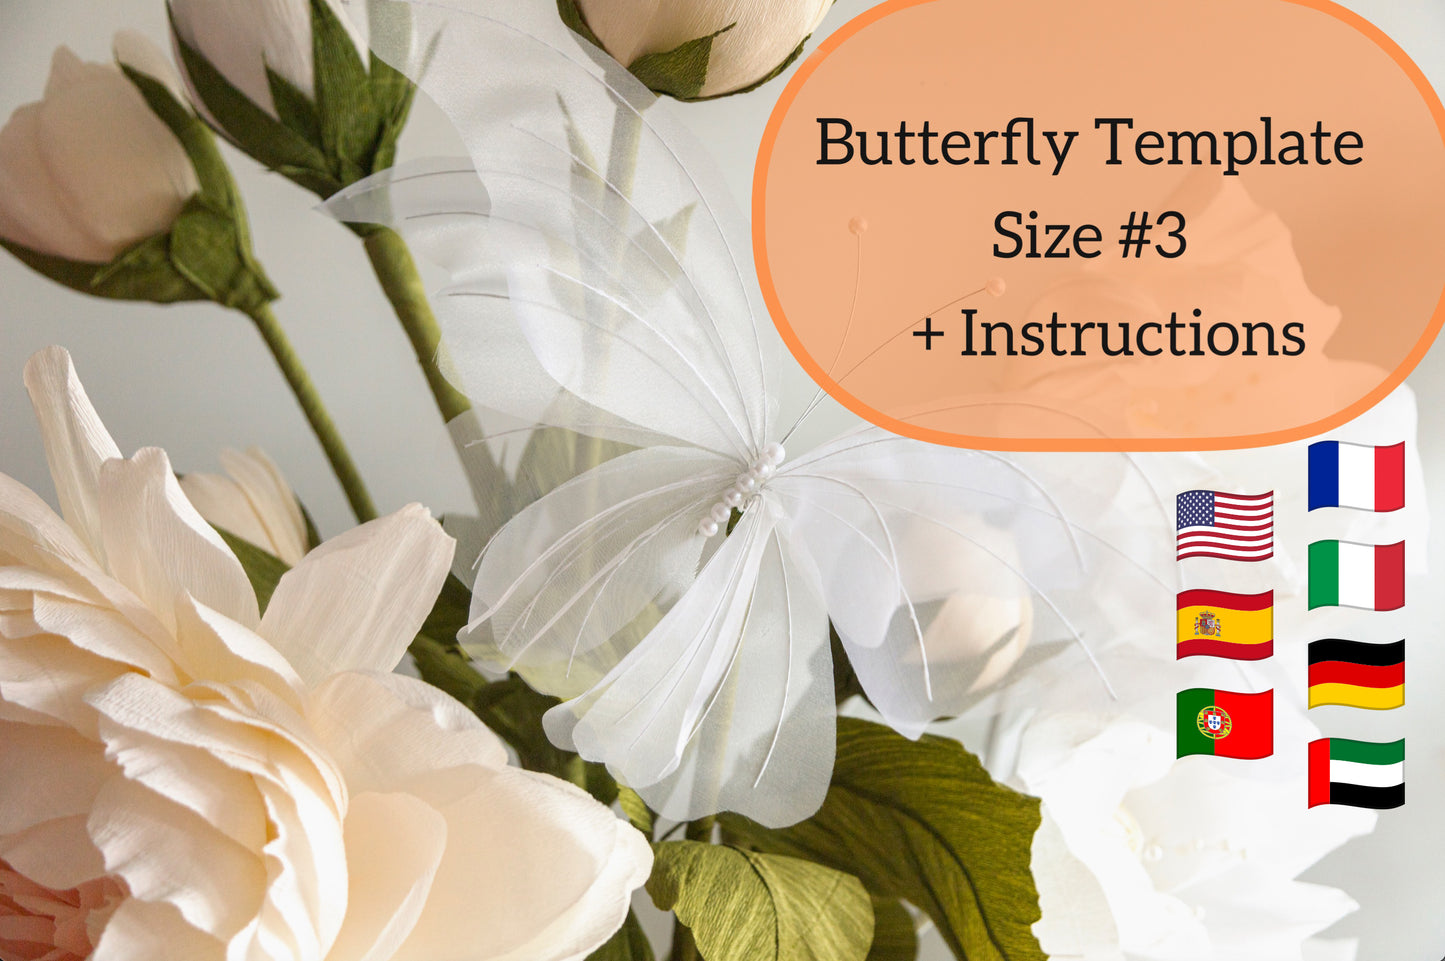 Templates for Giant Silk Butterfly